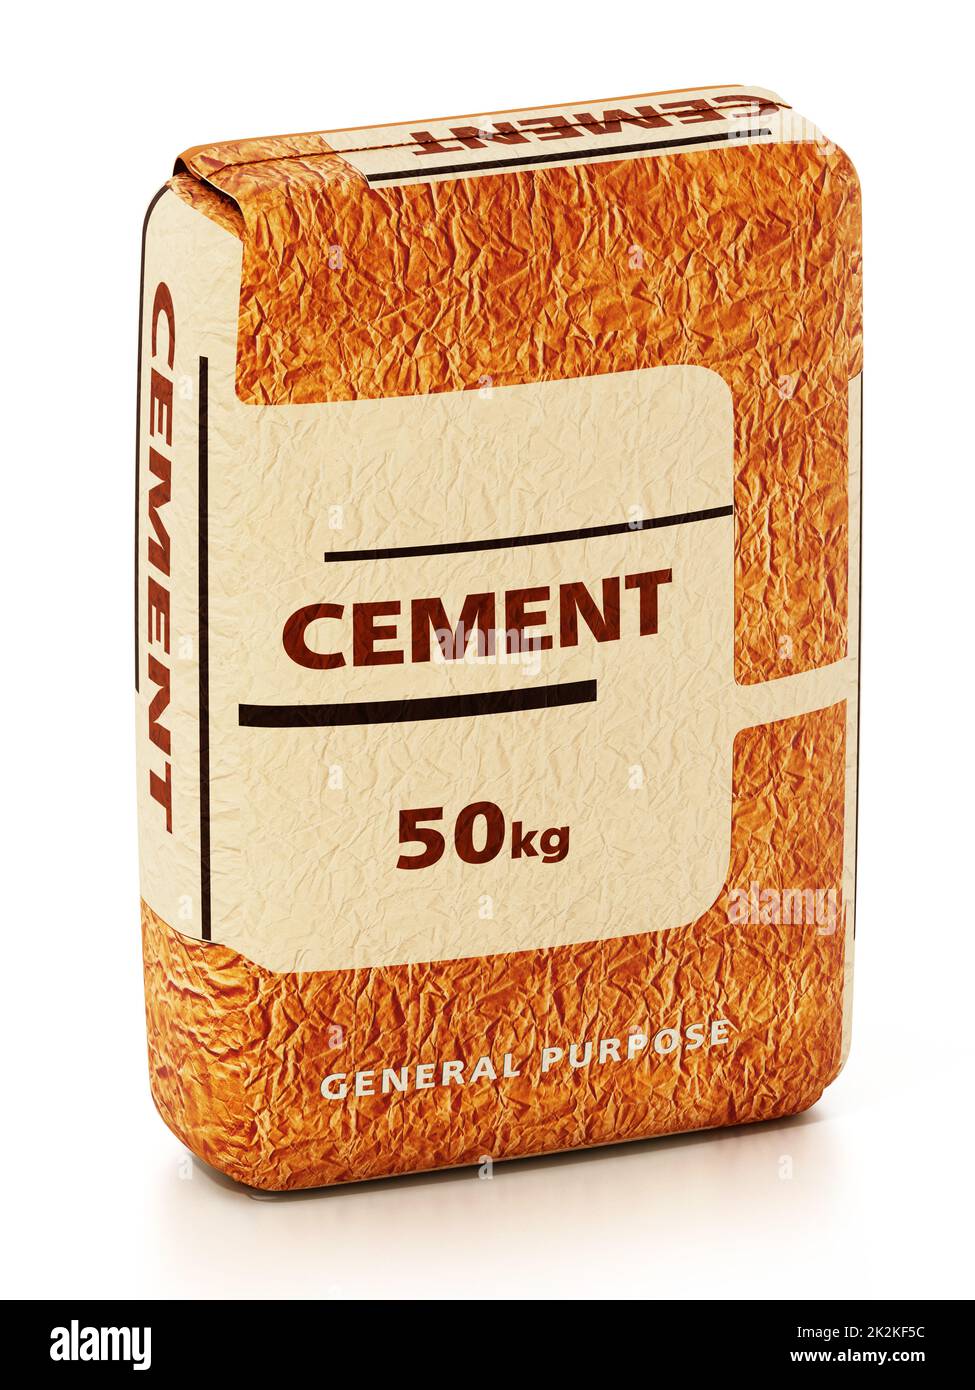 Cement bag with generic package design isolated on white background. 3D illustration Stock Photo